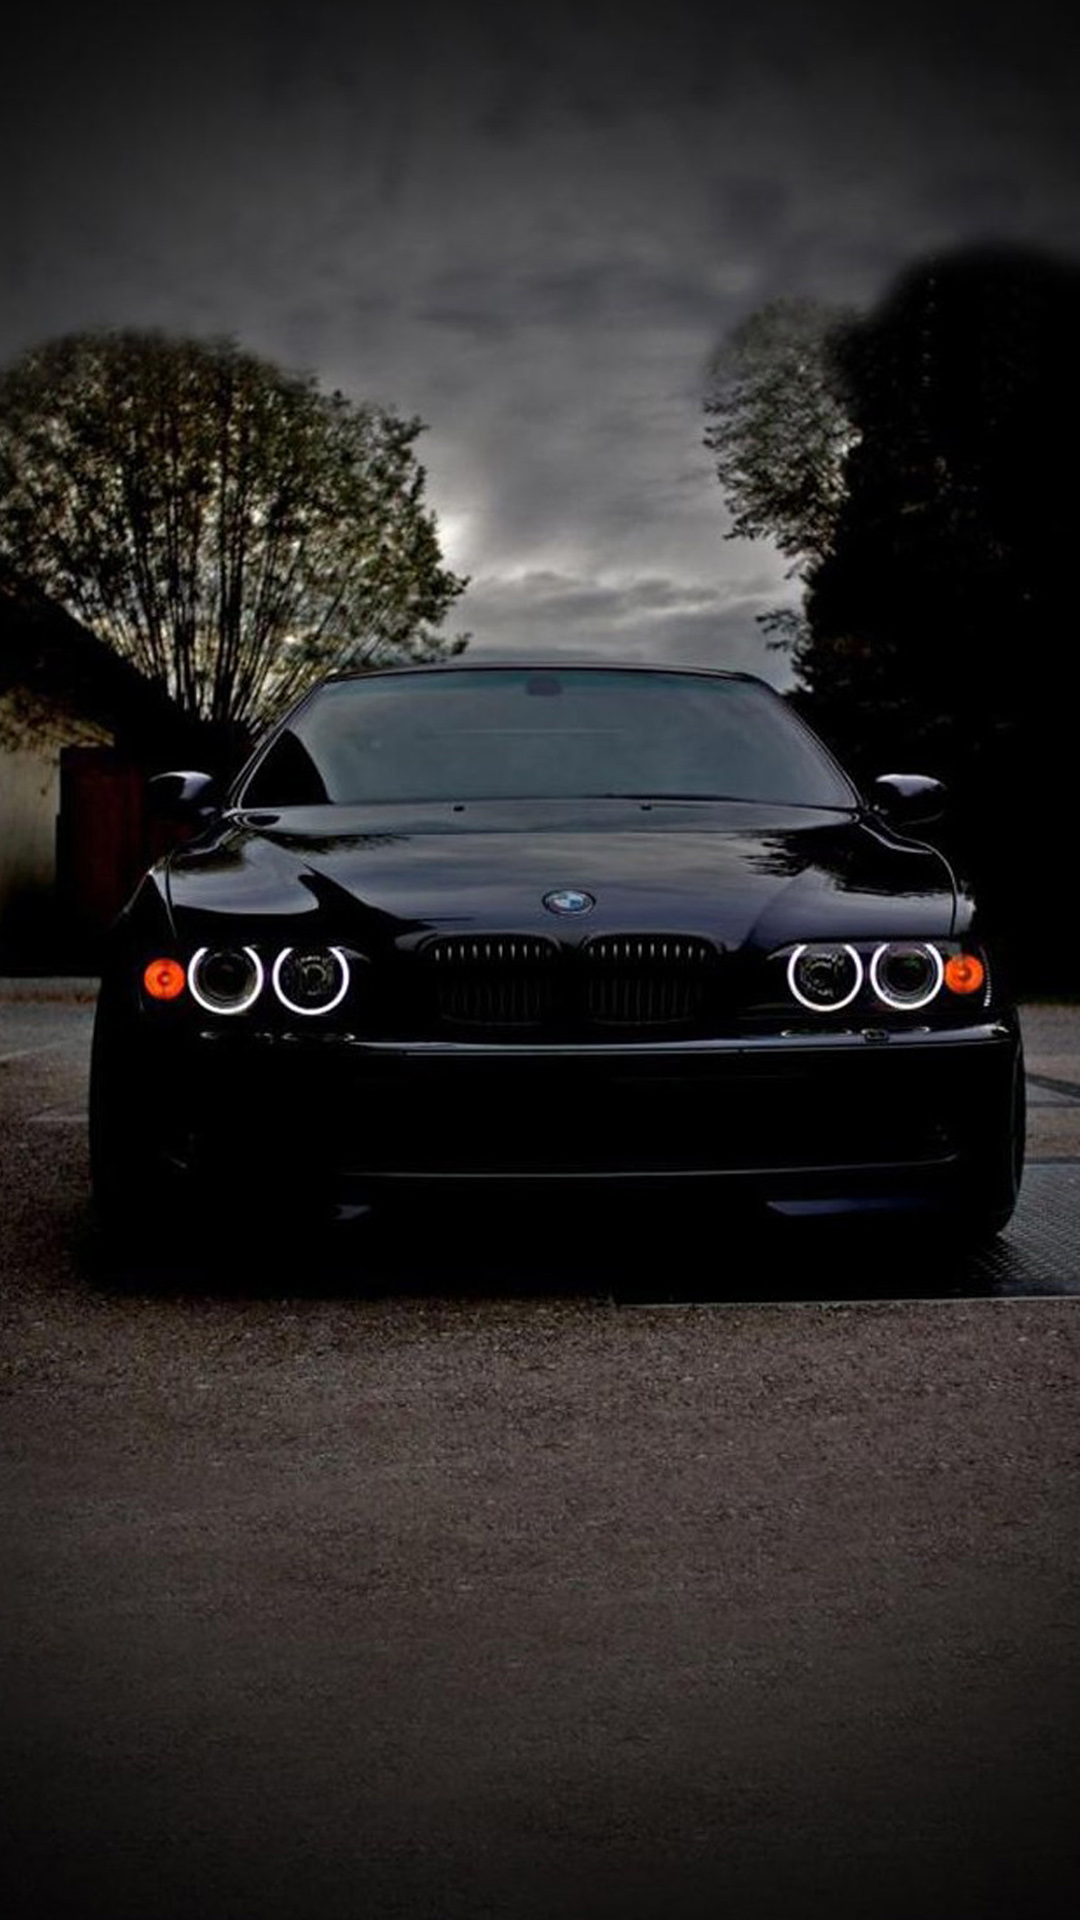 Black Bmw Wallpaper For Sony Xperia Z2 By Rogue Rattlesnake On Deviantart